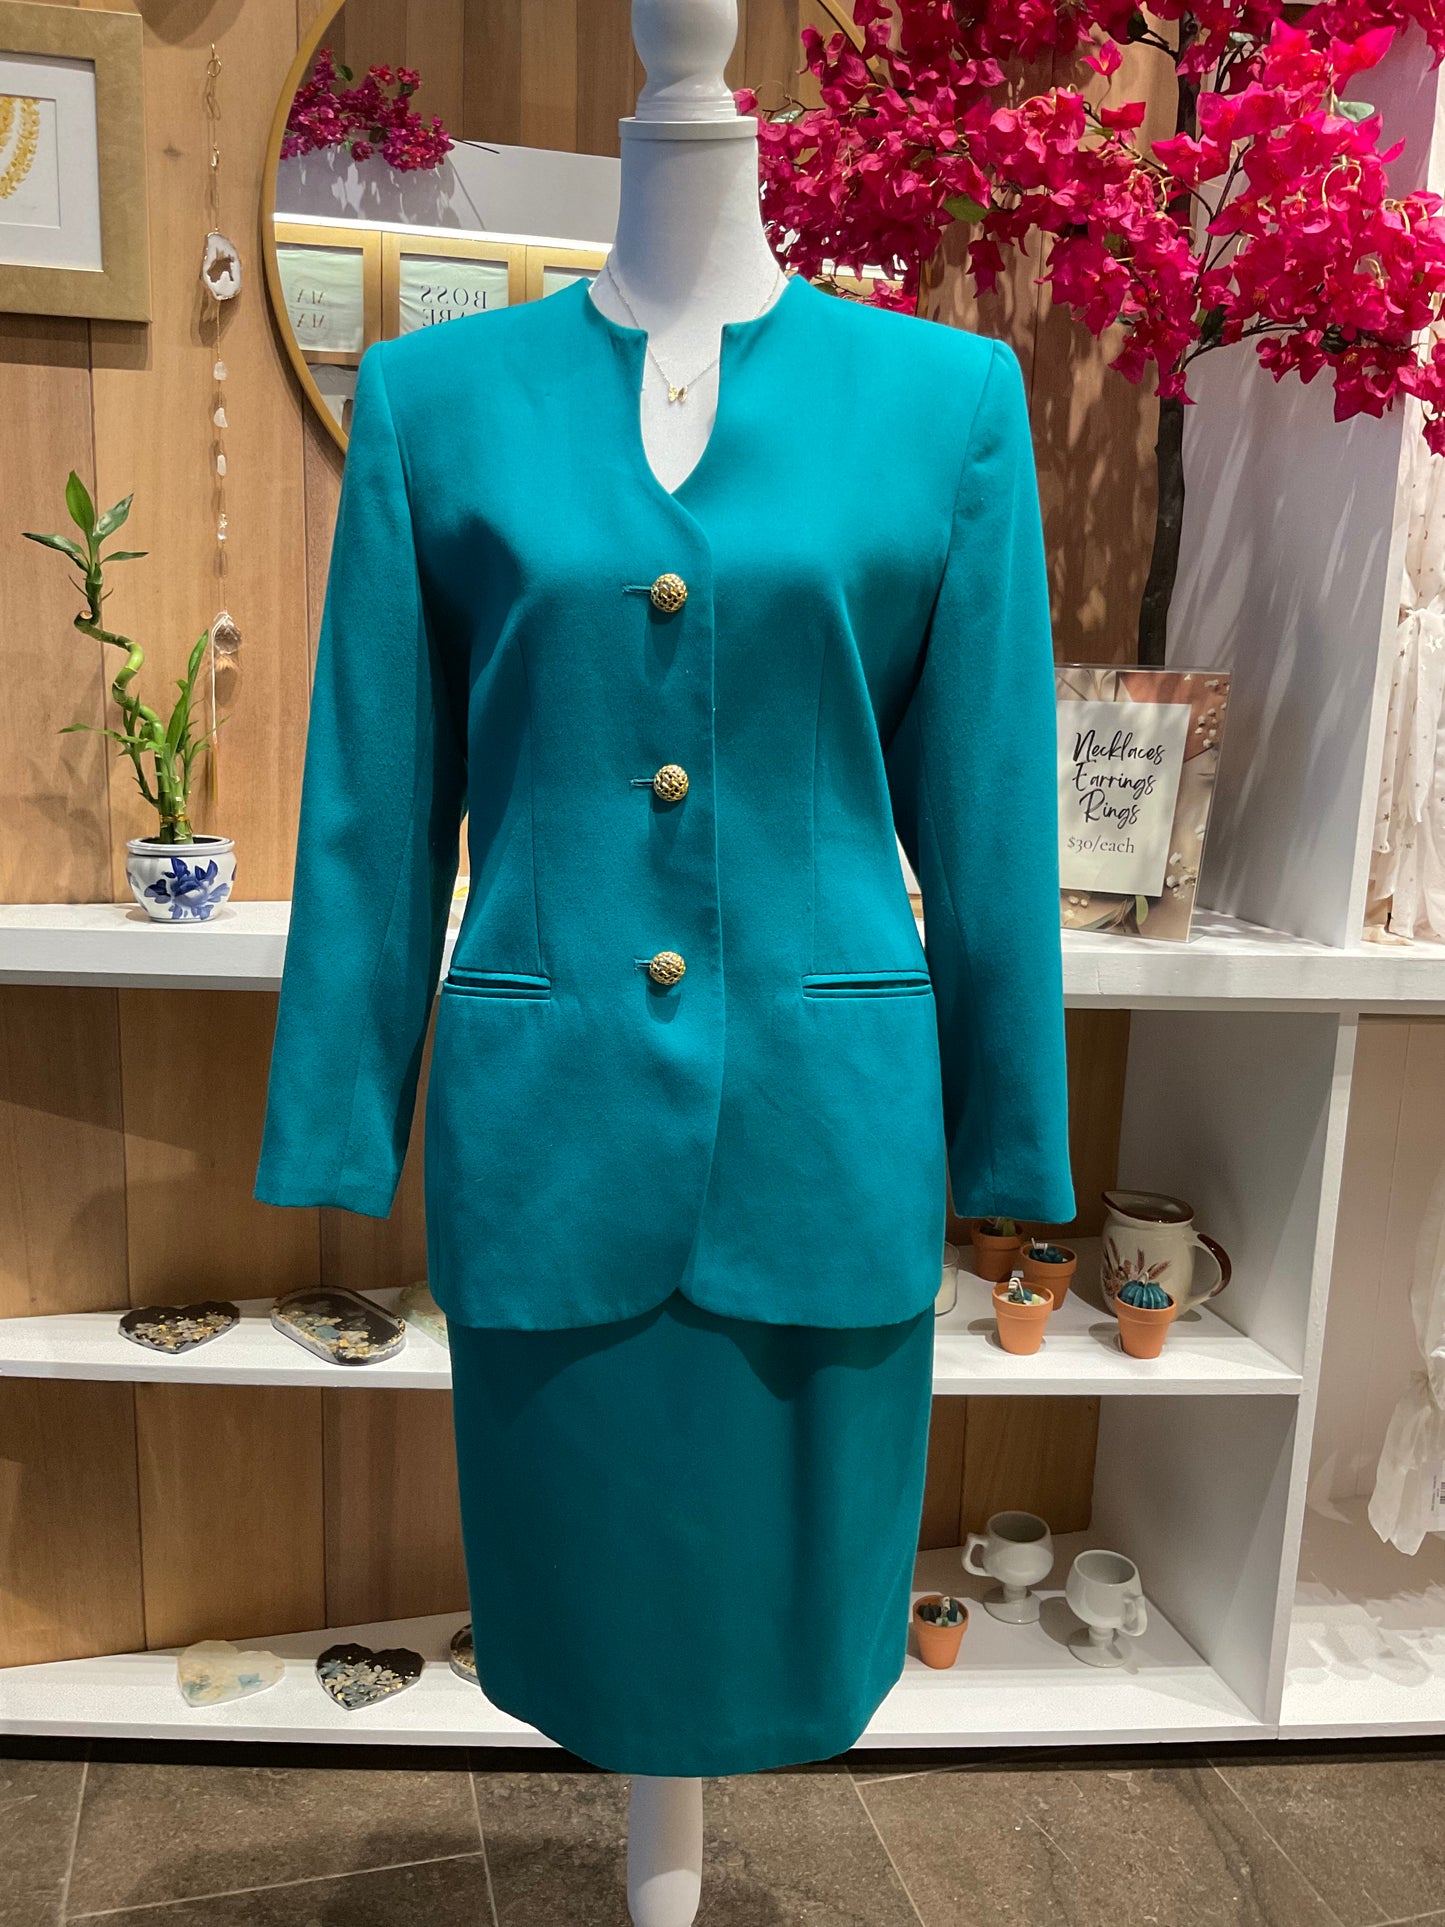 Vintage Set ~ Turquoise business outerwear